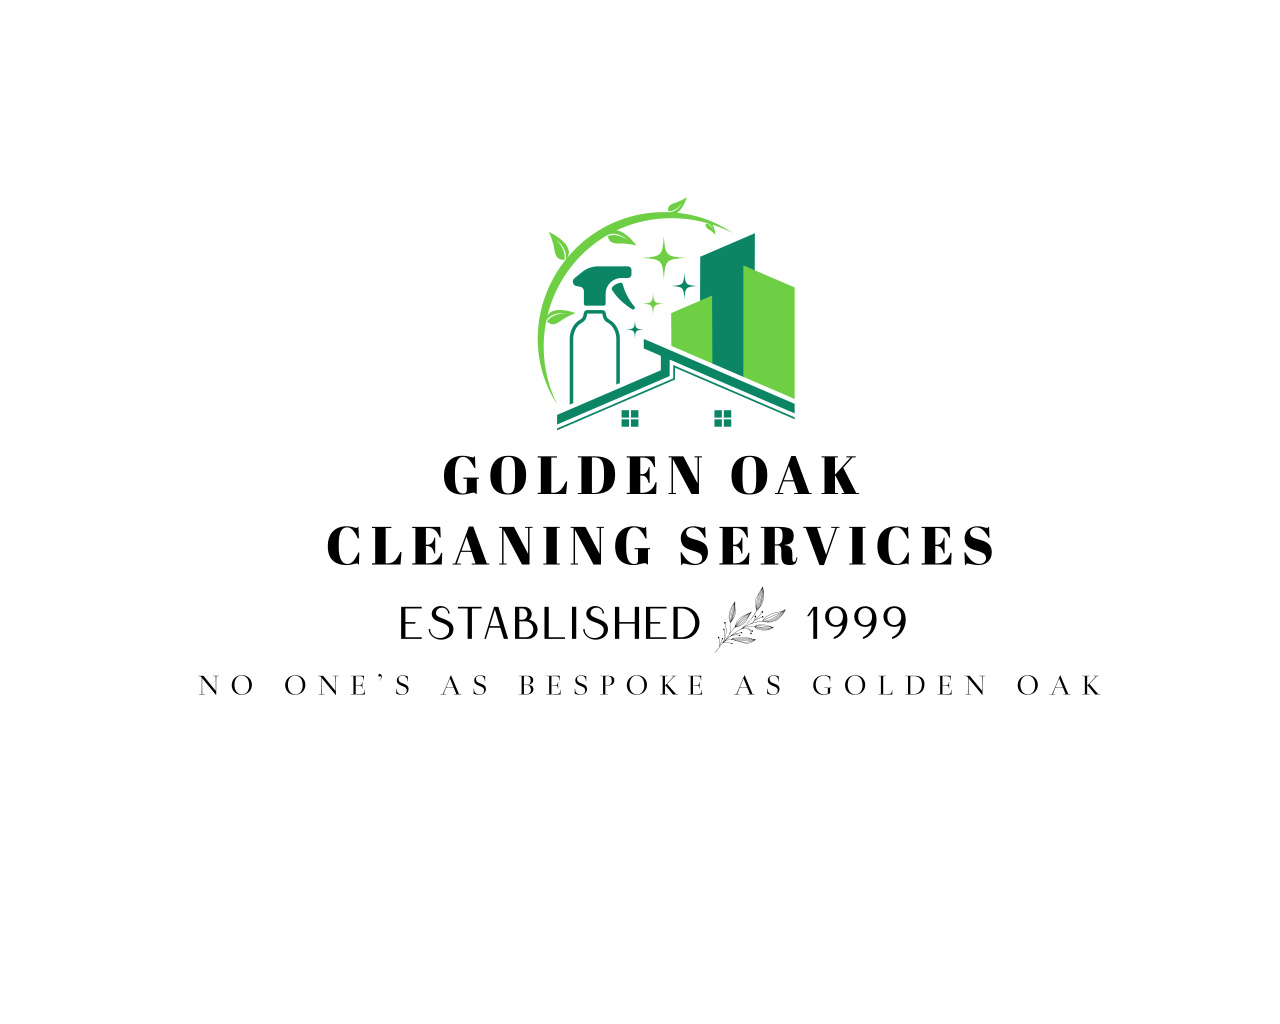 Golden Oak Cleaning Services